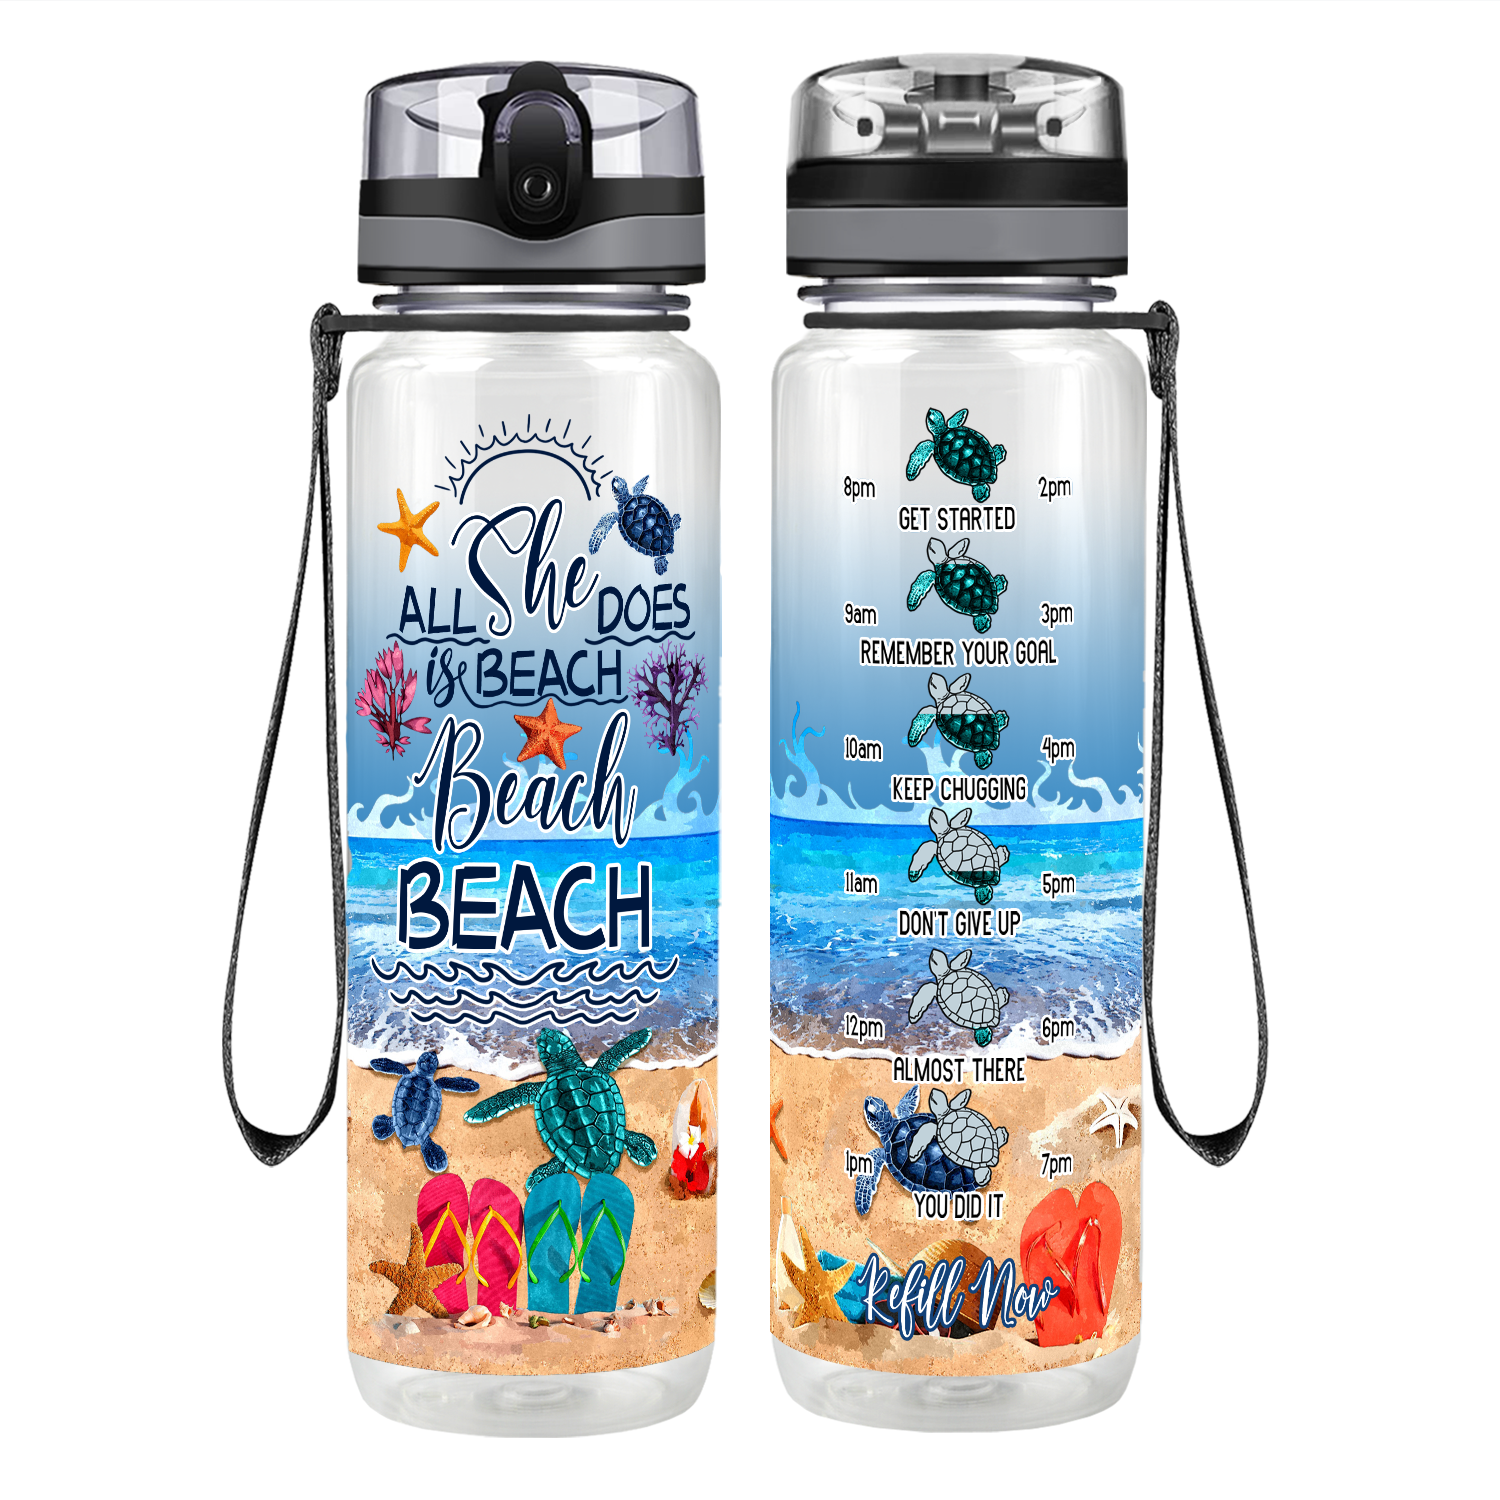 Personalized All She Does is Beach Beach Beach Motivational Tracking Water Bottle